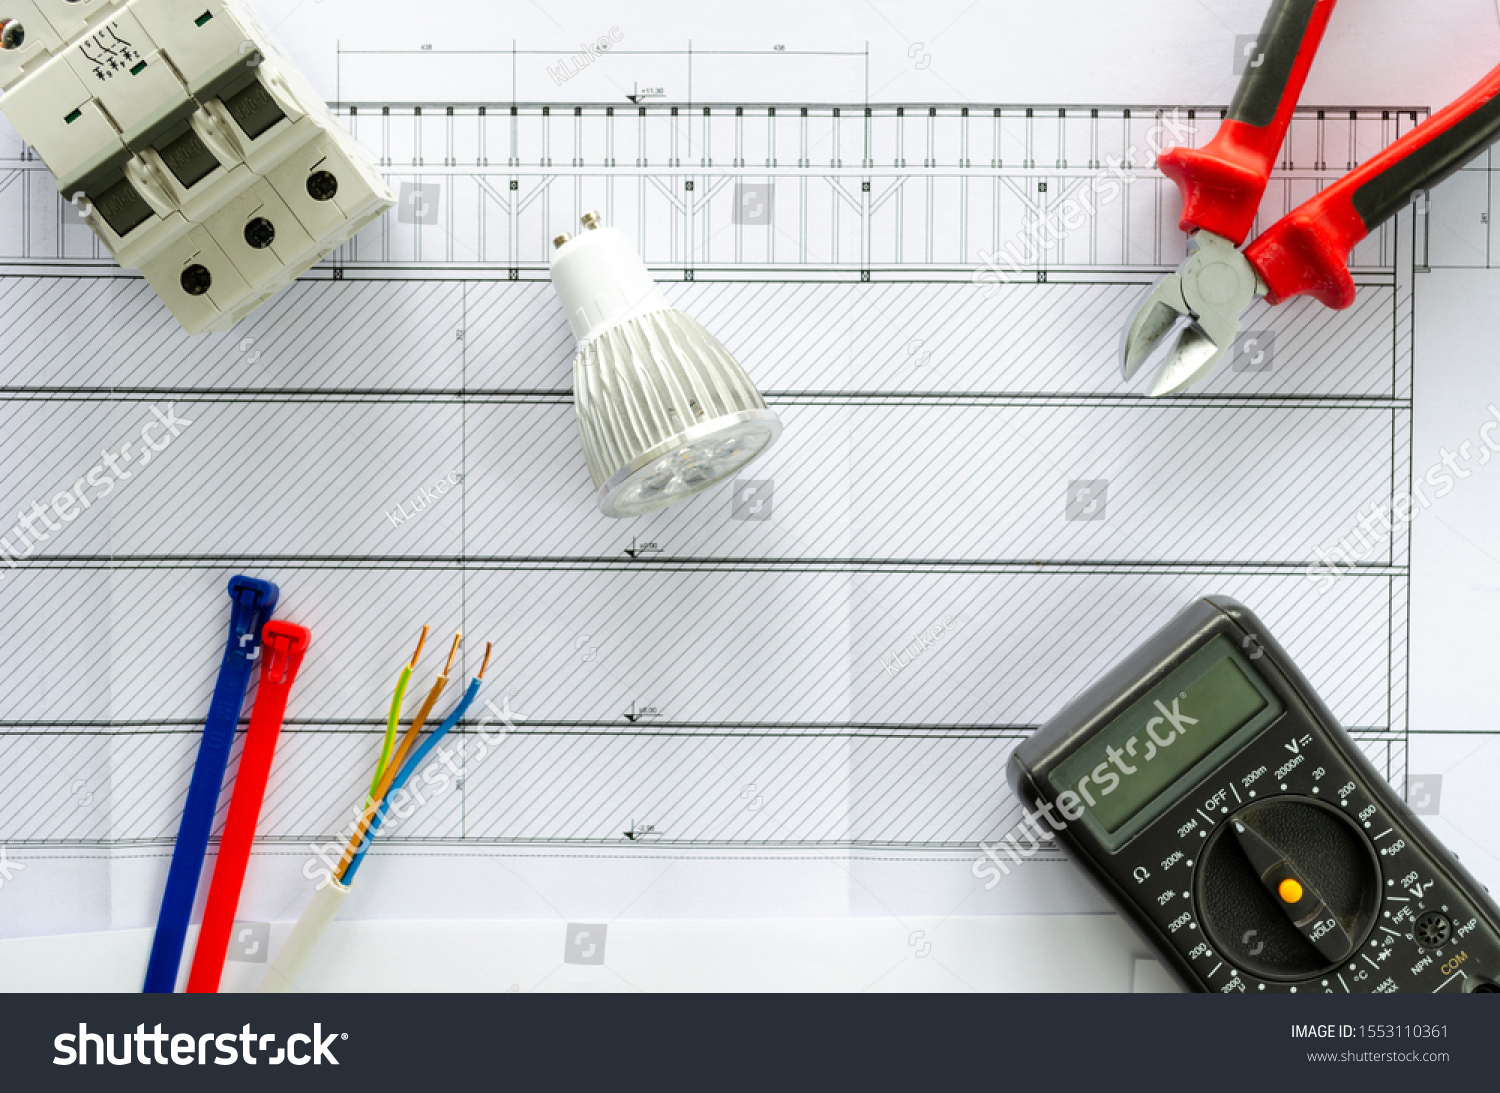 electrical tools and materials